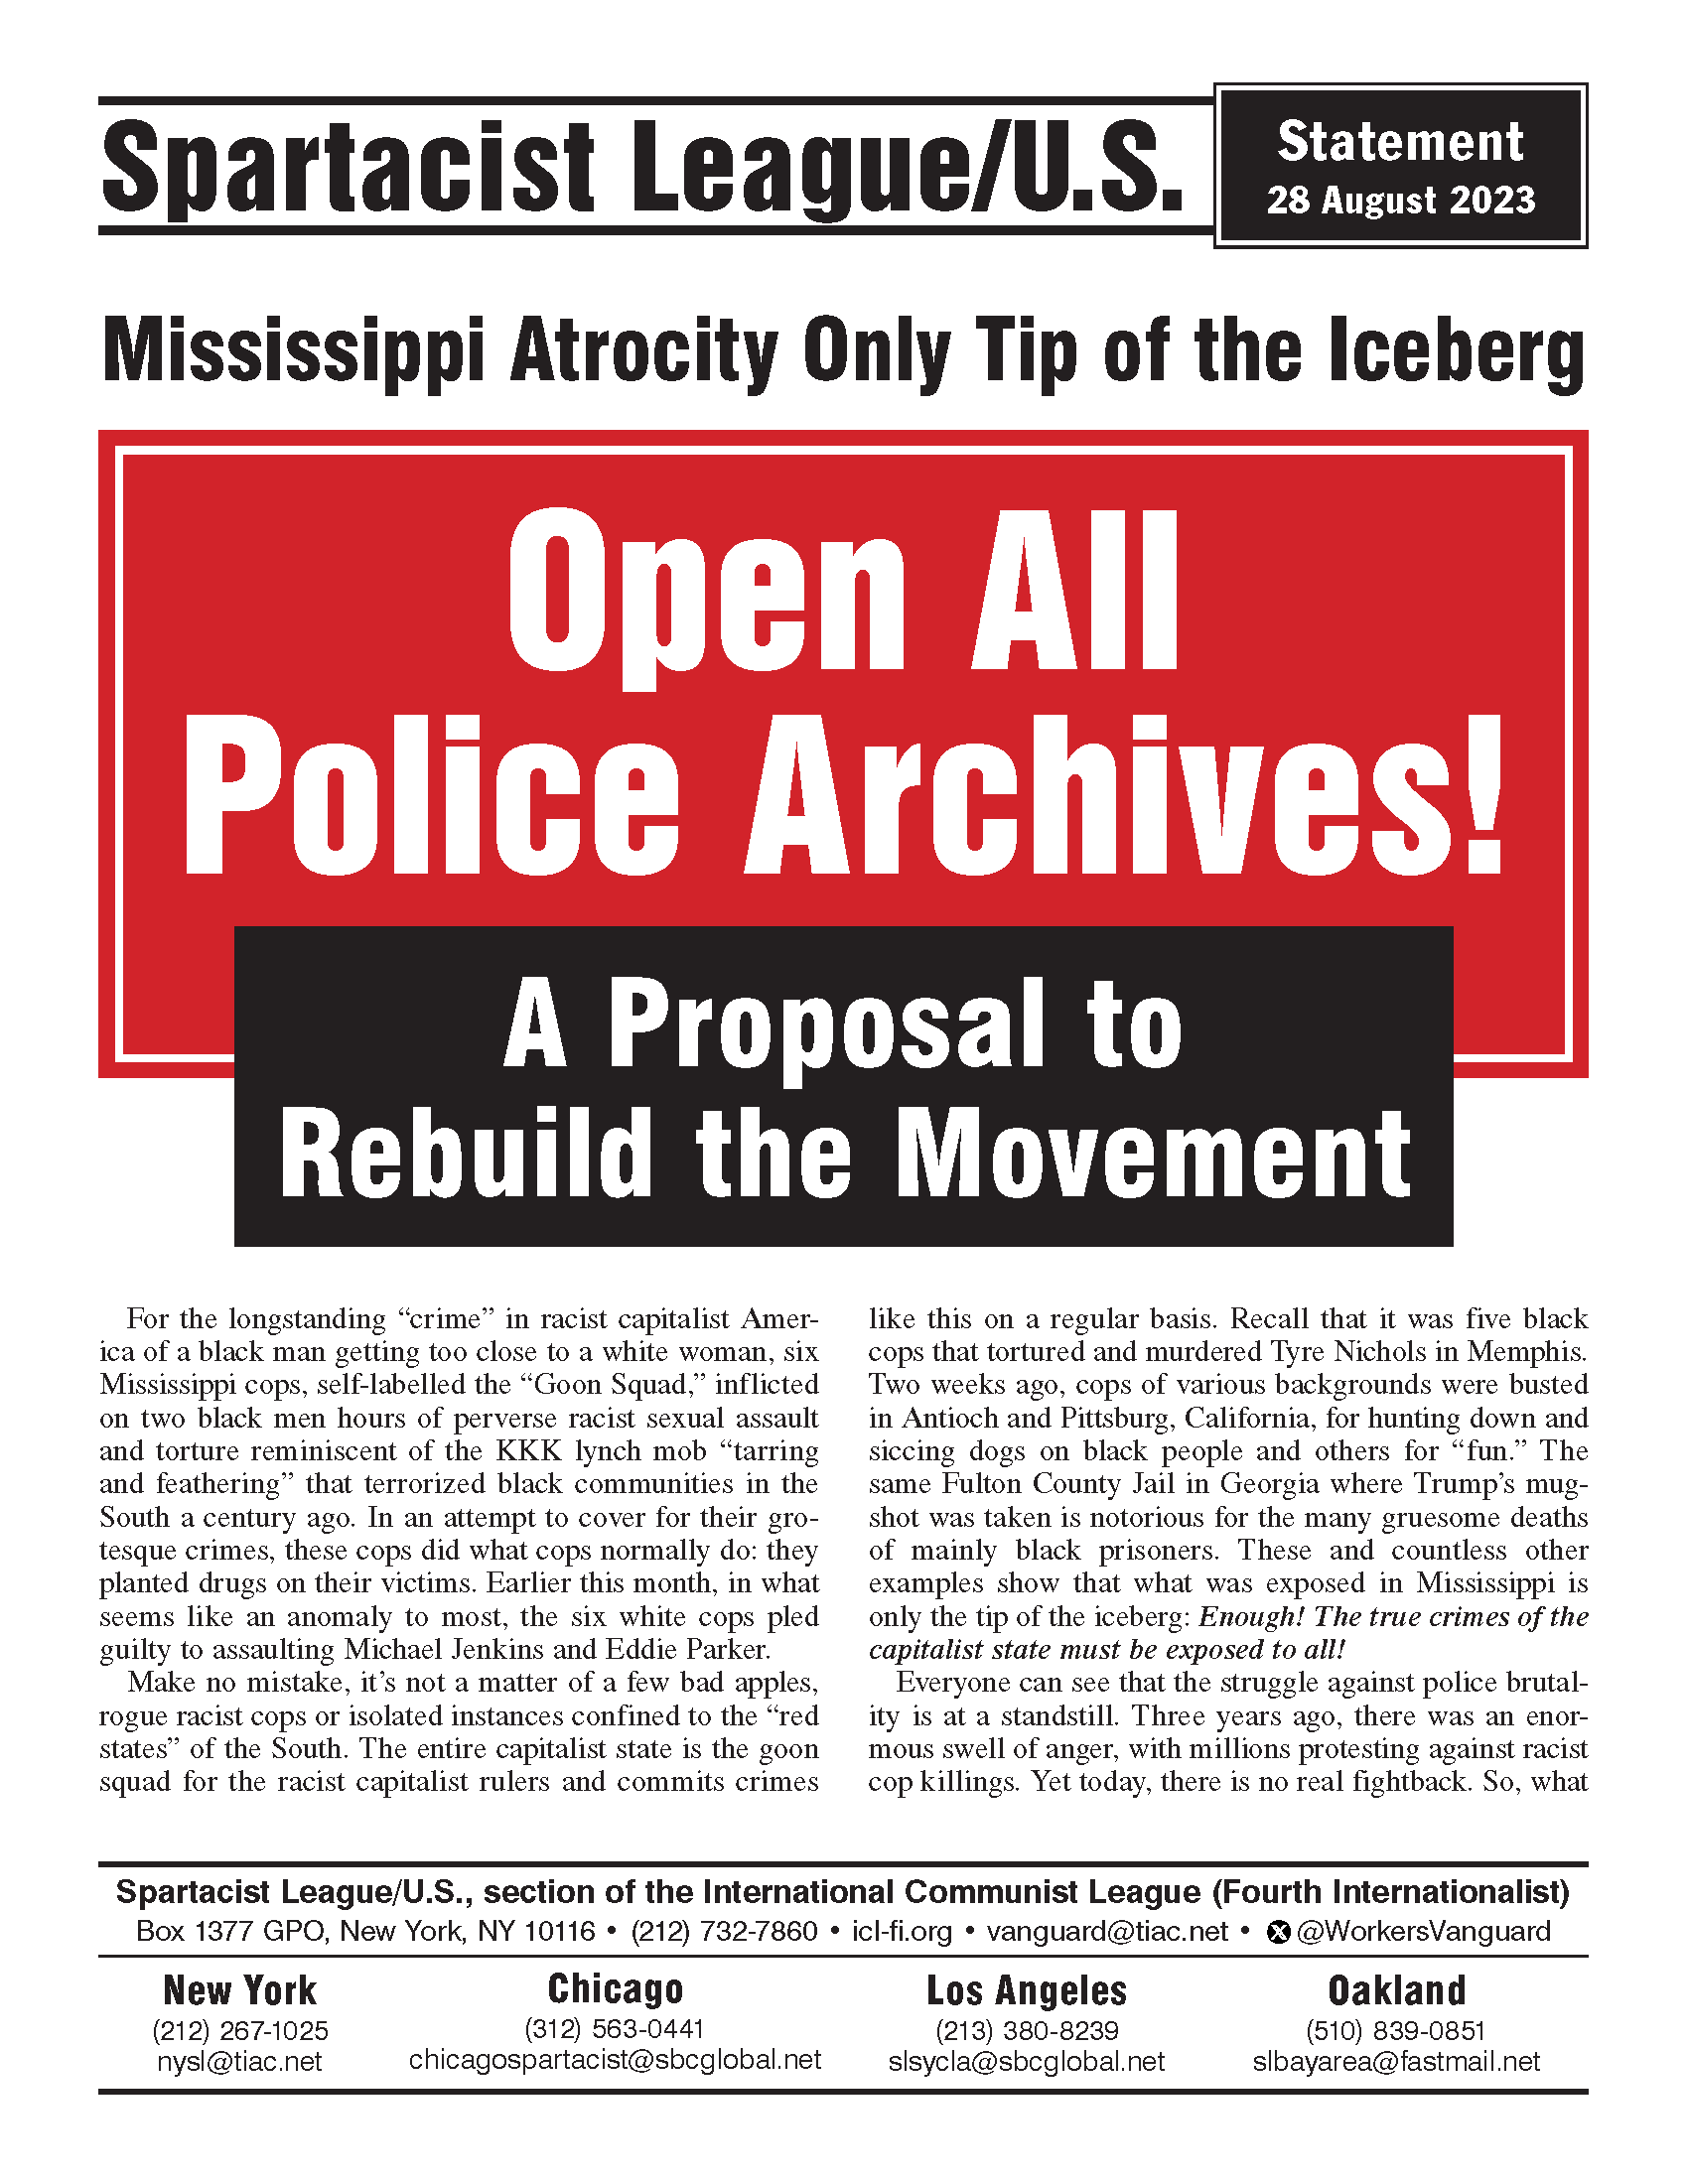 Open All Police Archives!  |  28 August 2023